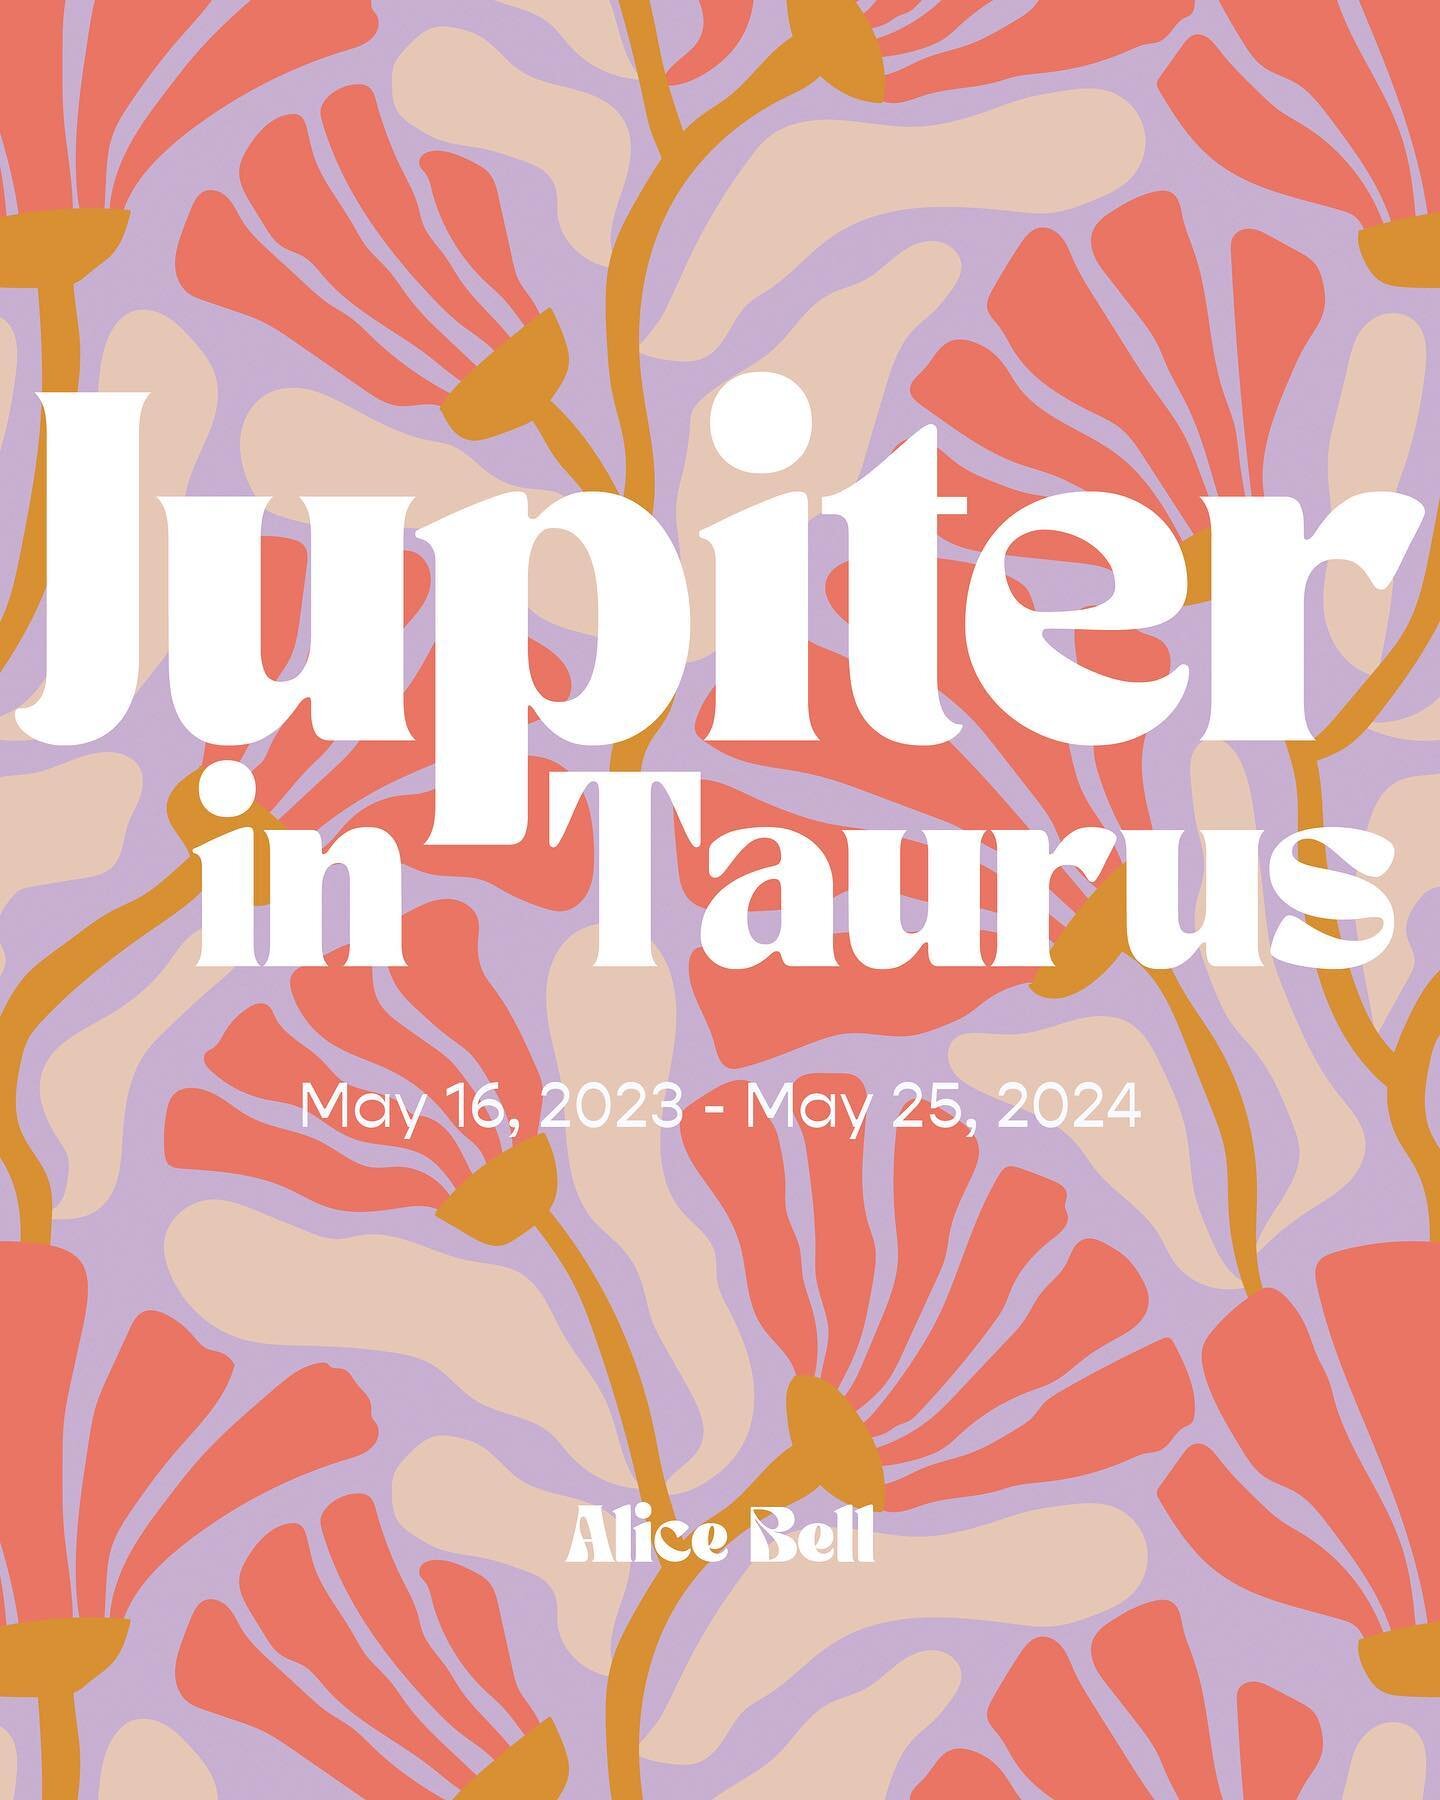 Jupiter moves into Taurus today, after spending the majority of the last year in Aries. Therefore, a new house of your chart is now being activated with growth and opportunities until May 2024. Keep in mind that the themes mentioned for your rising w